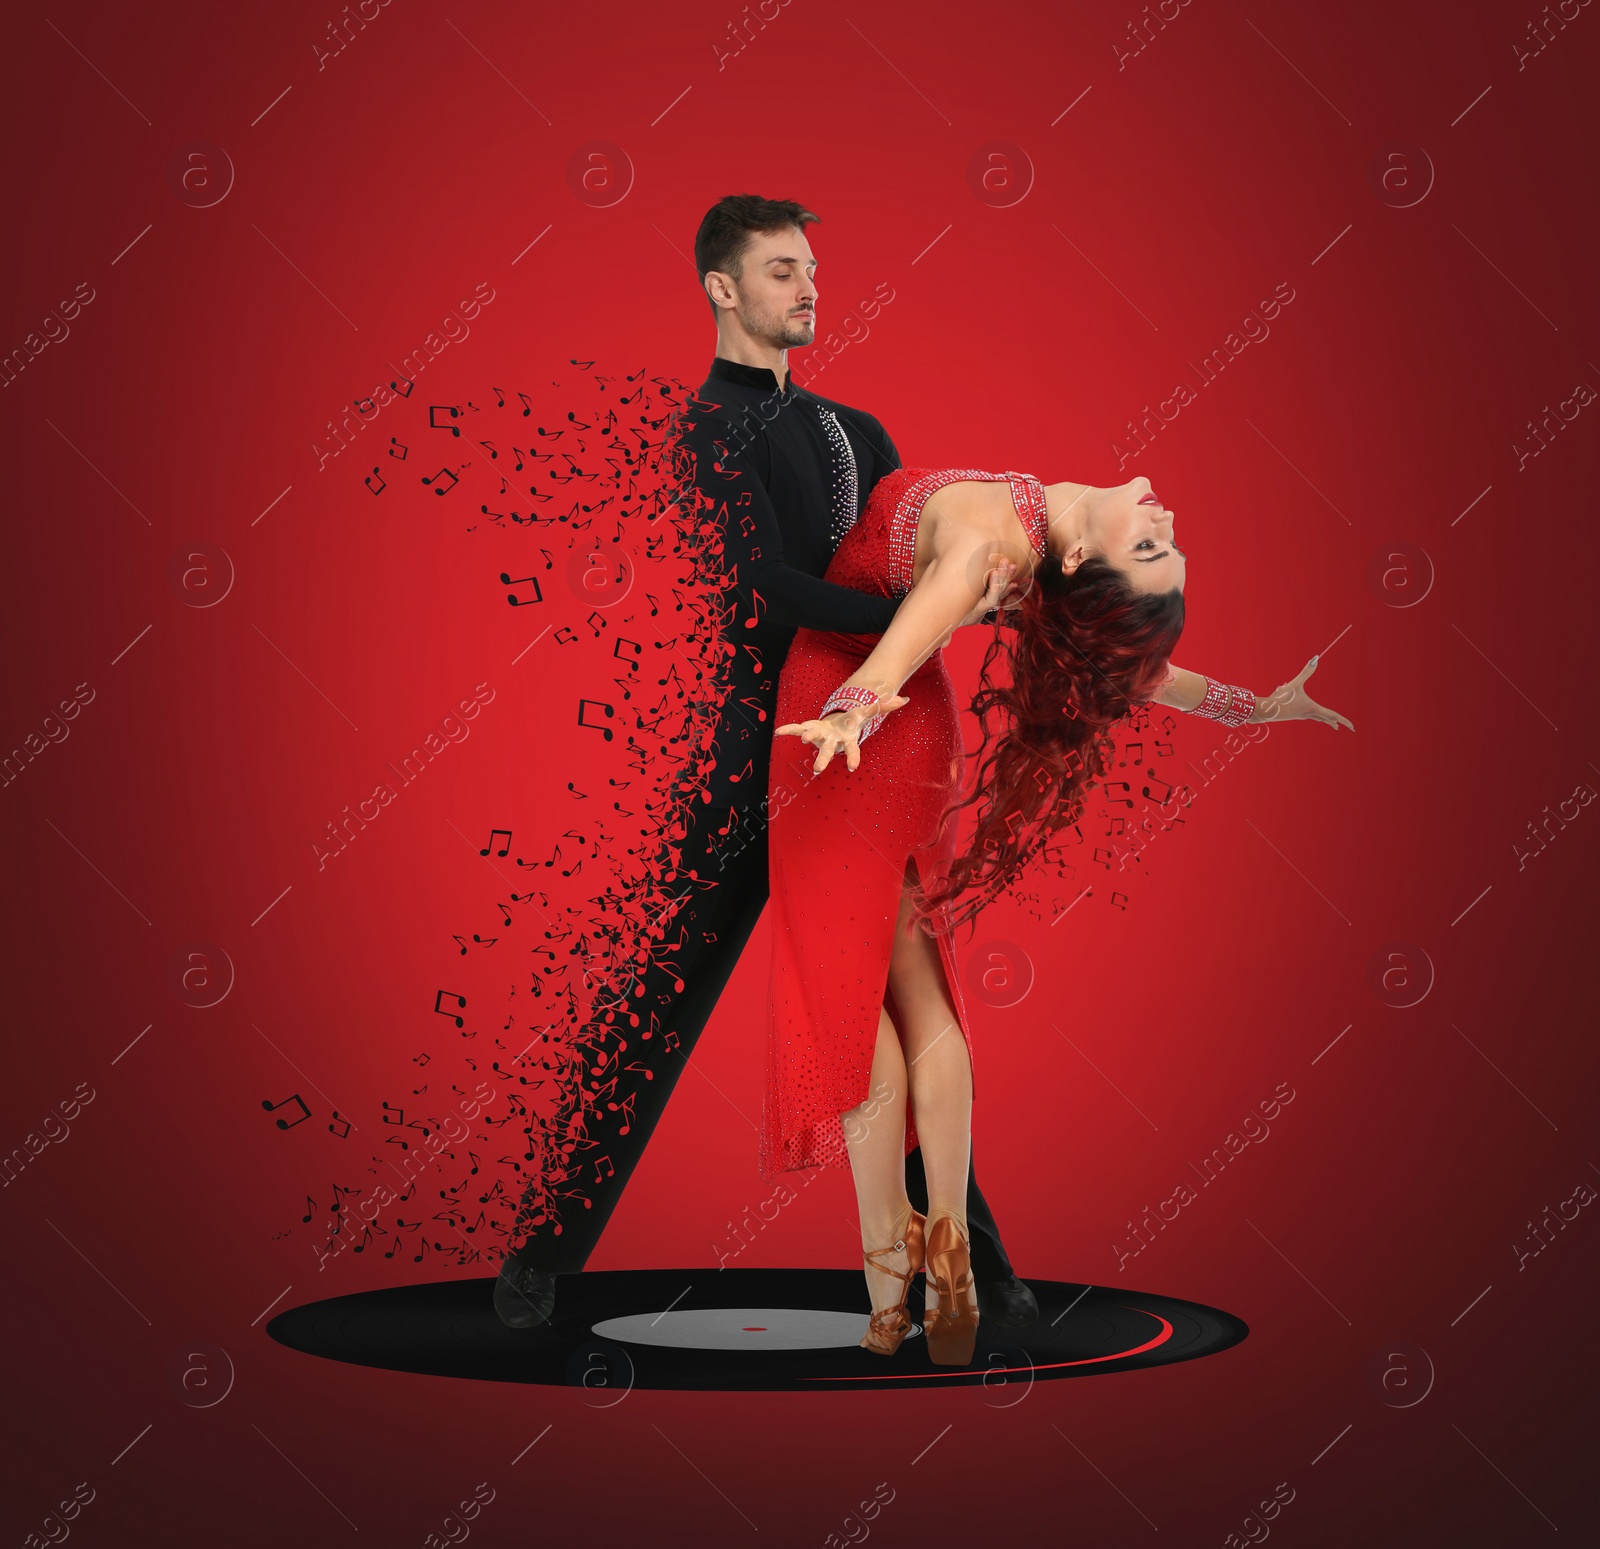 Image of Passionate young couple dancing on red background. Bright creative design